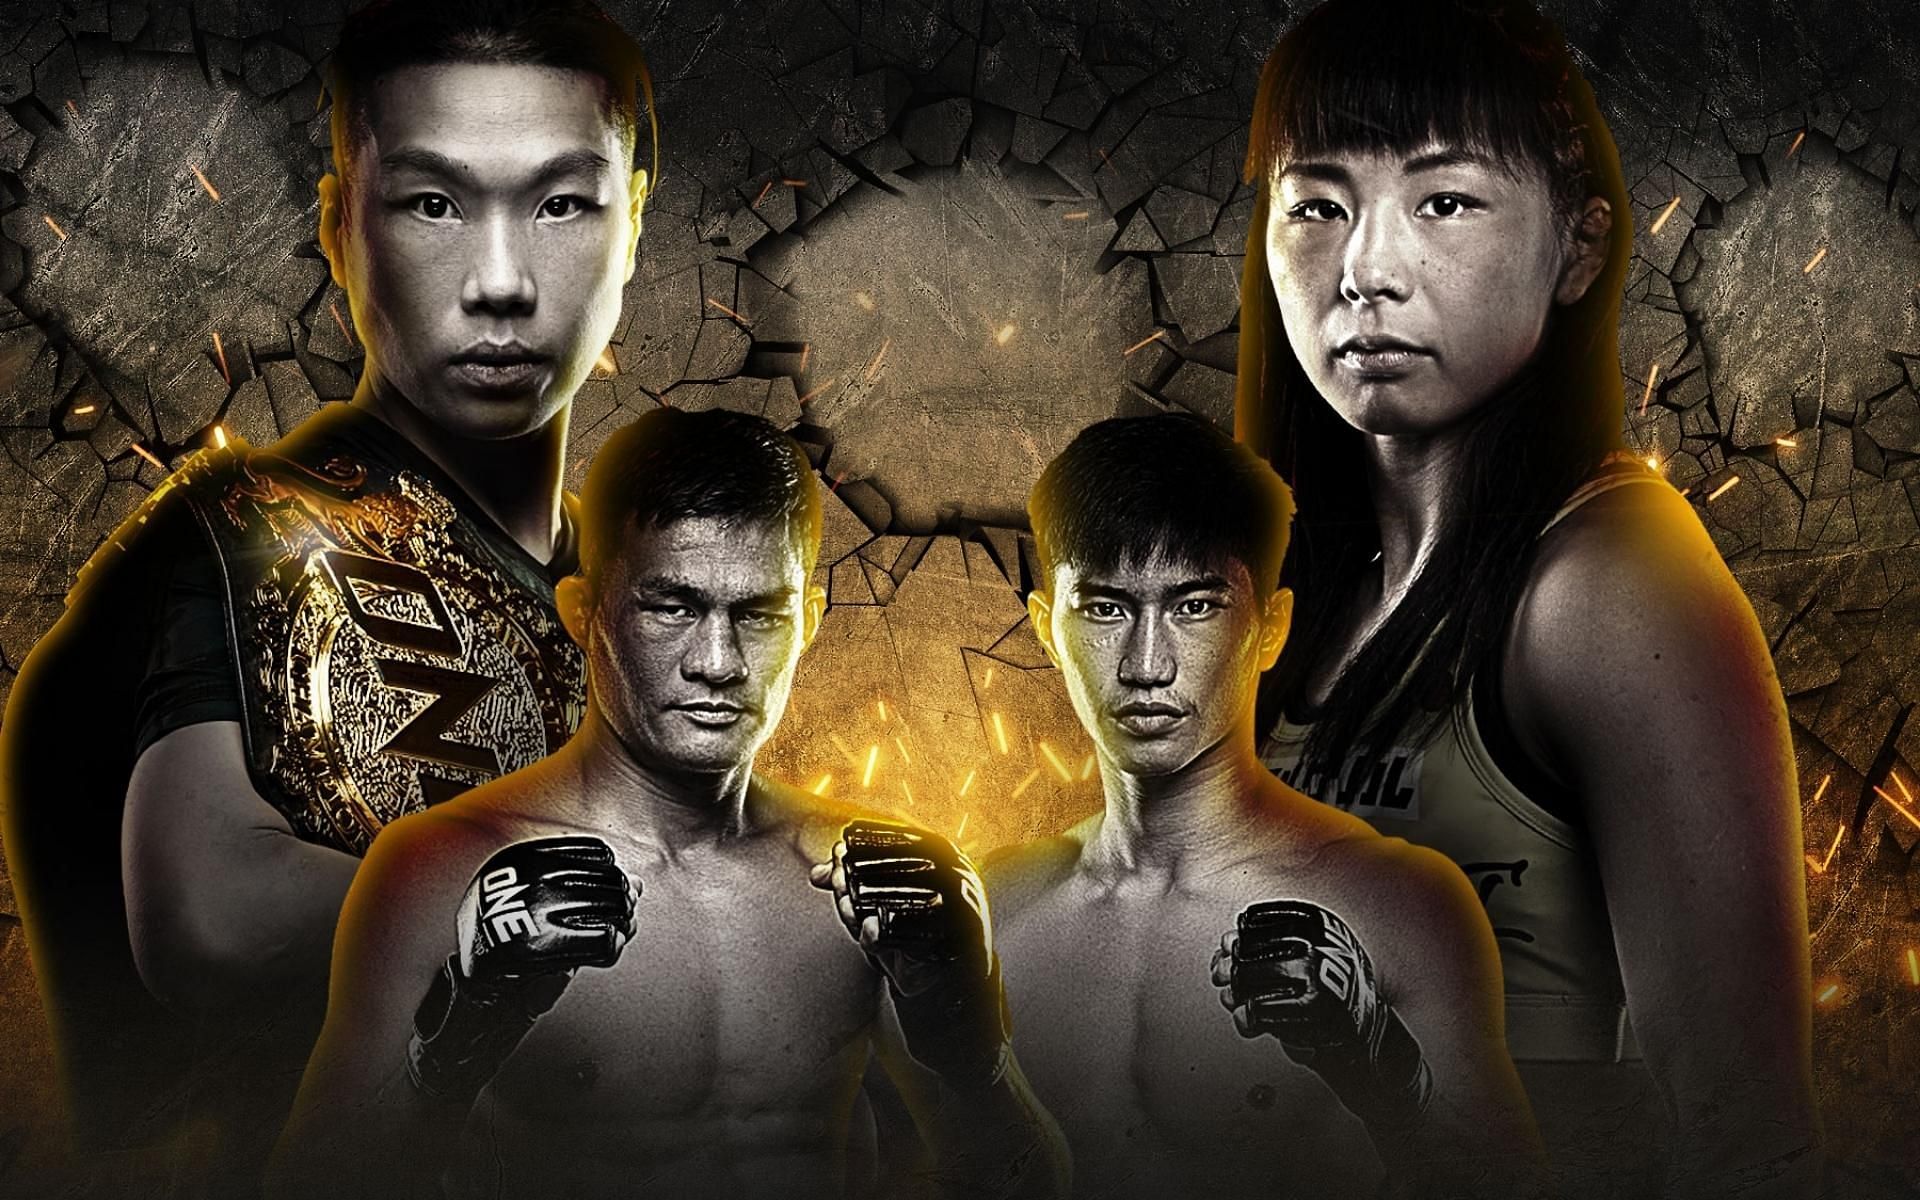 ONE Championship opens the year with a bang with ONE: Heavy Hitters. (Image courtesy of ONE Championship)